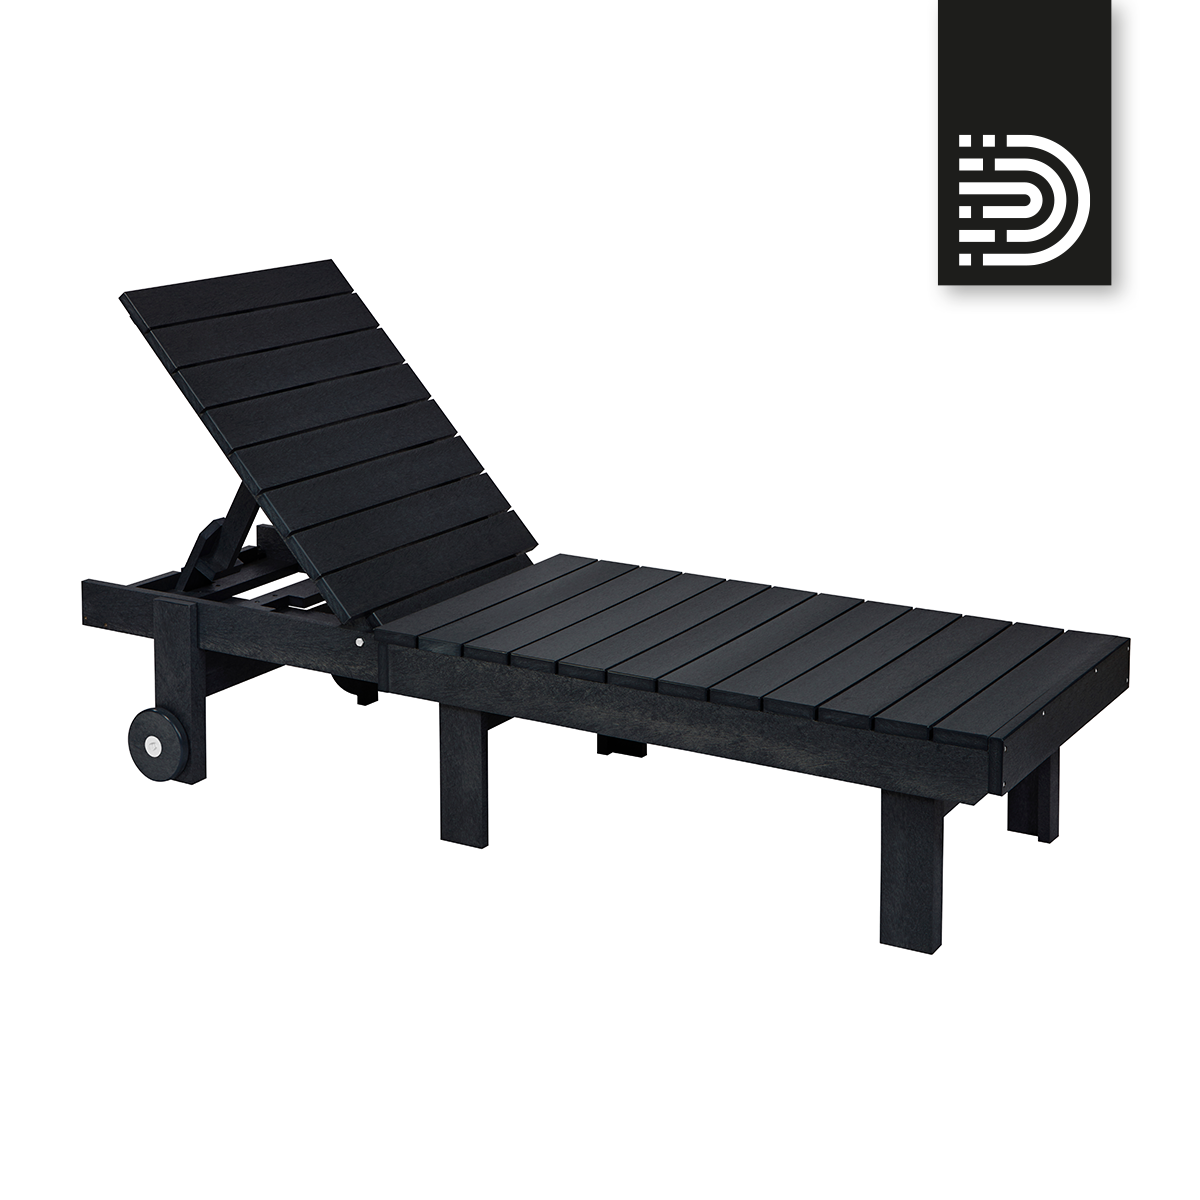 L78 Chaise Lounge with Wheels - black 14